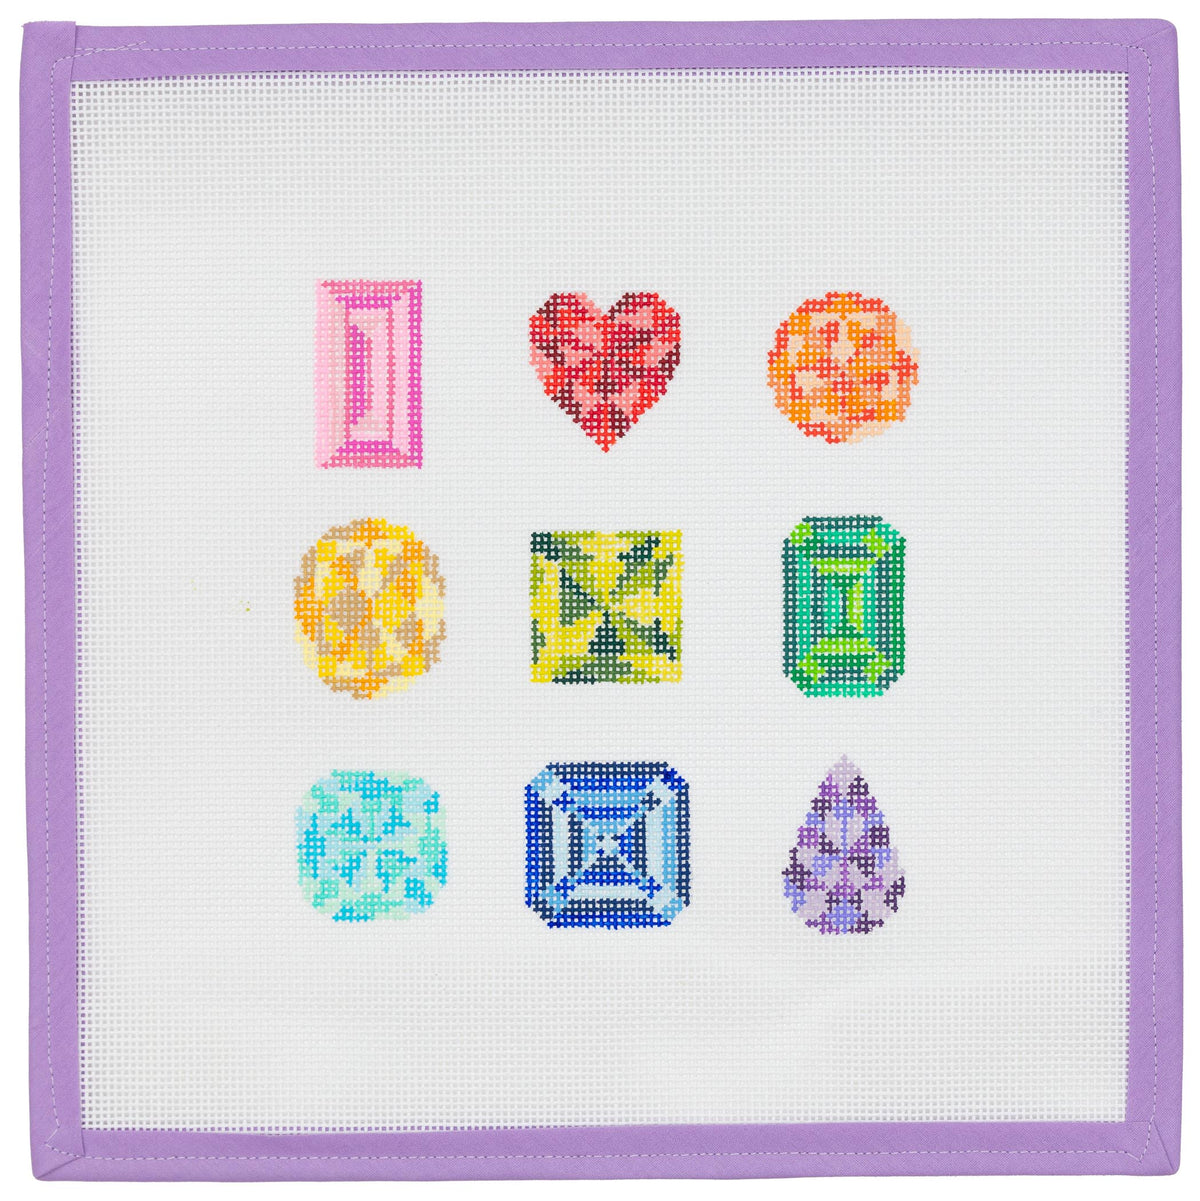 Reel point embroidered needlepoint - Gem